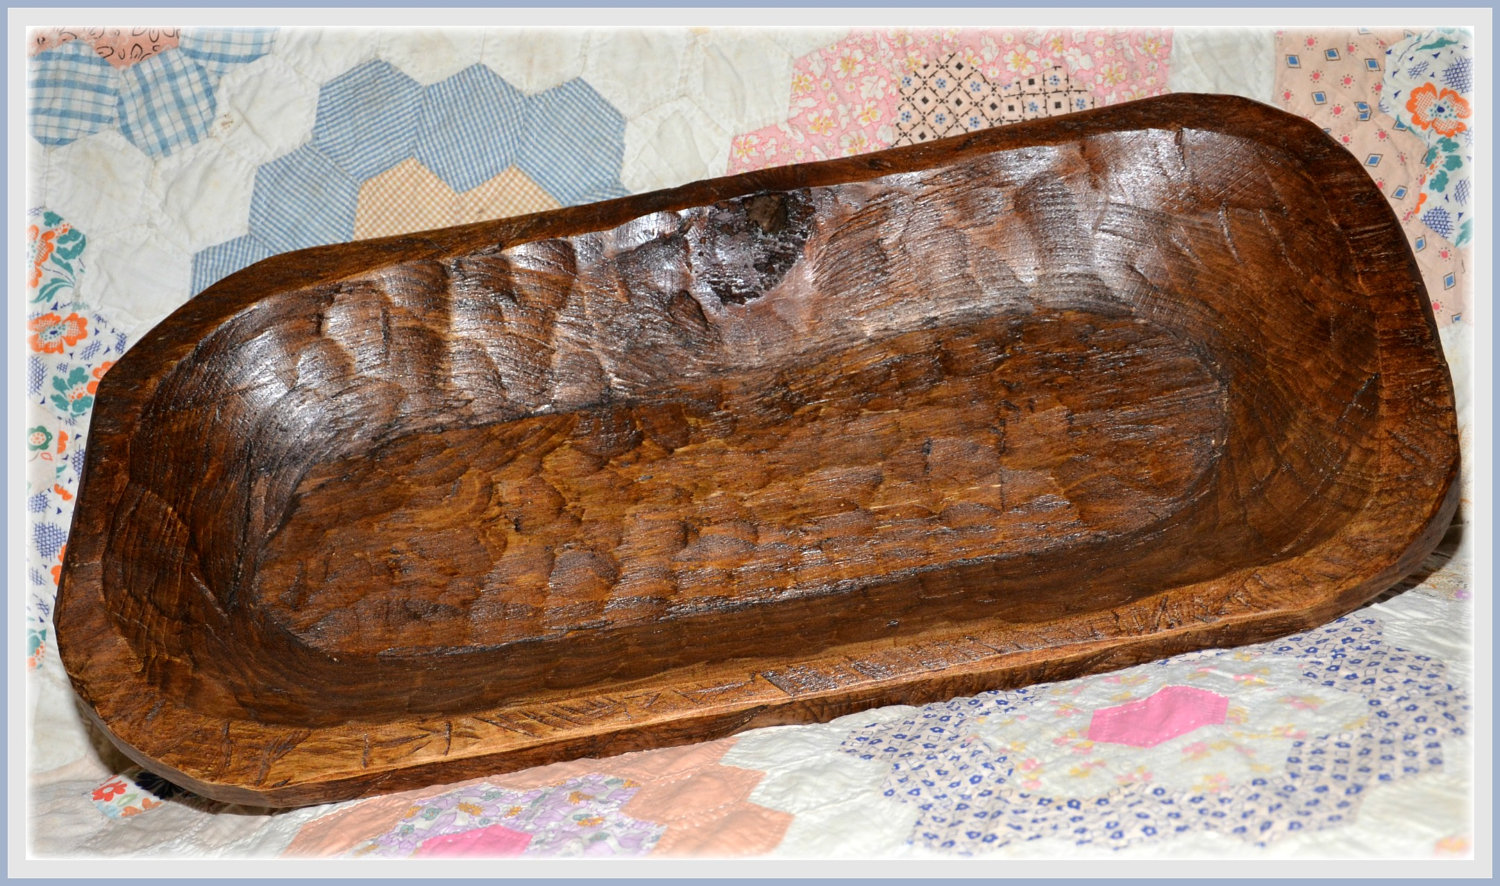 Shallow "trencher" dough bowl stained on a quilt